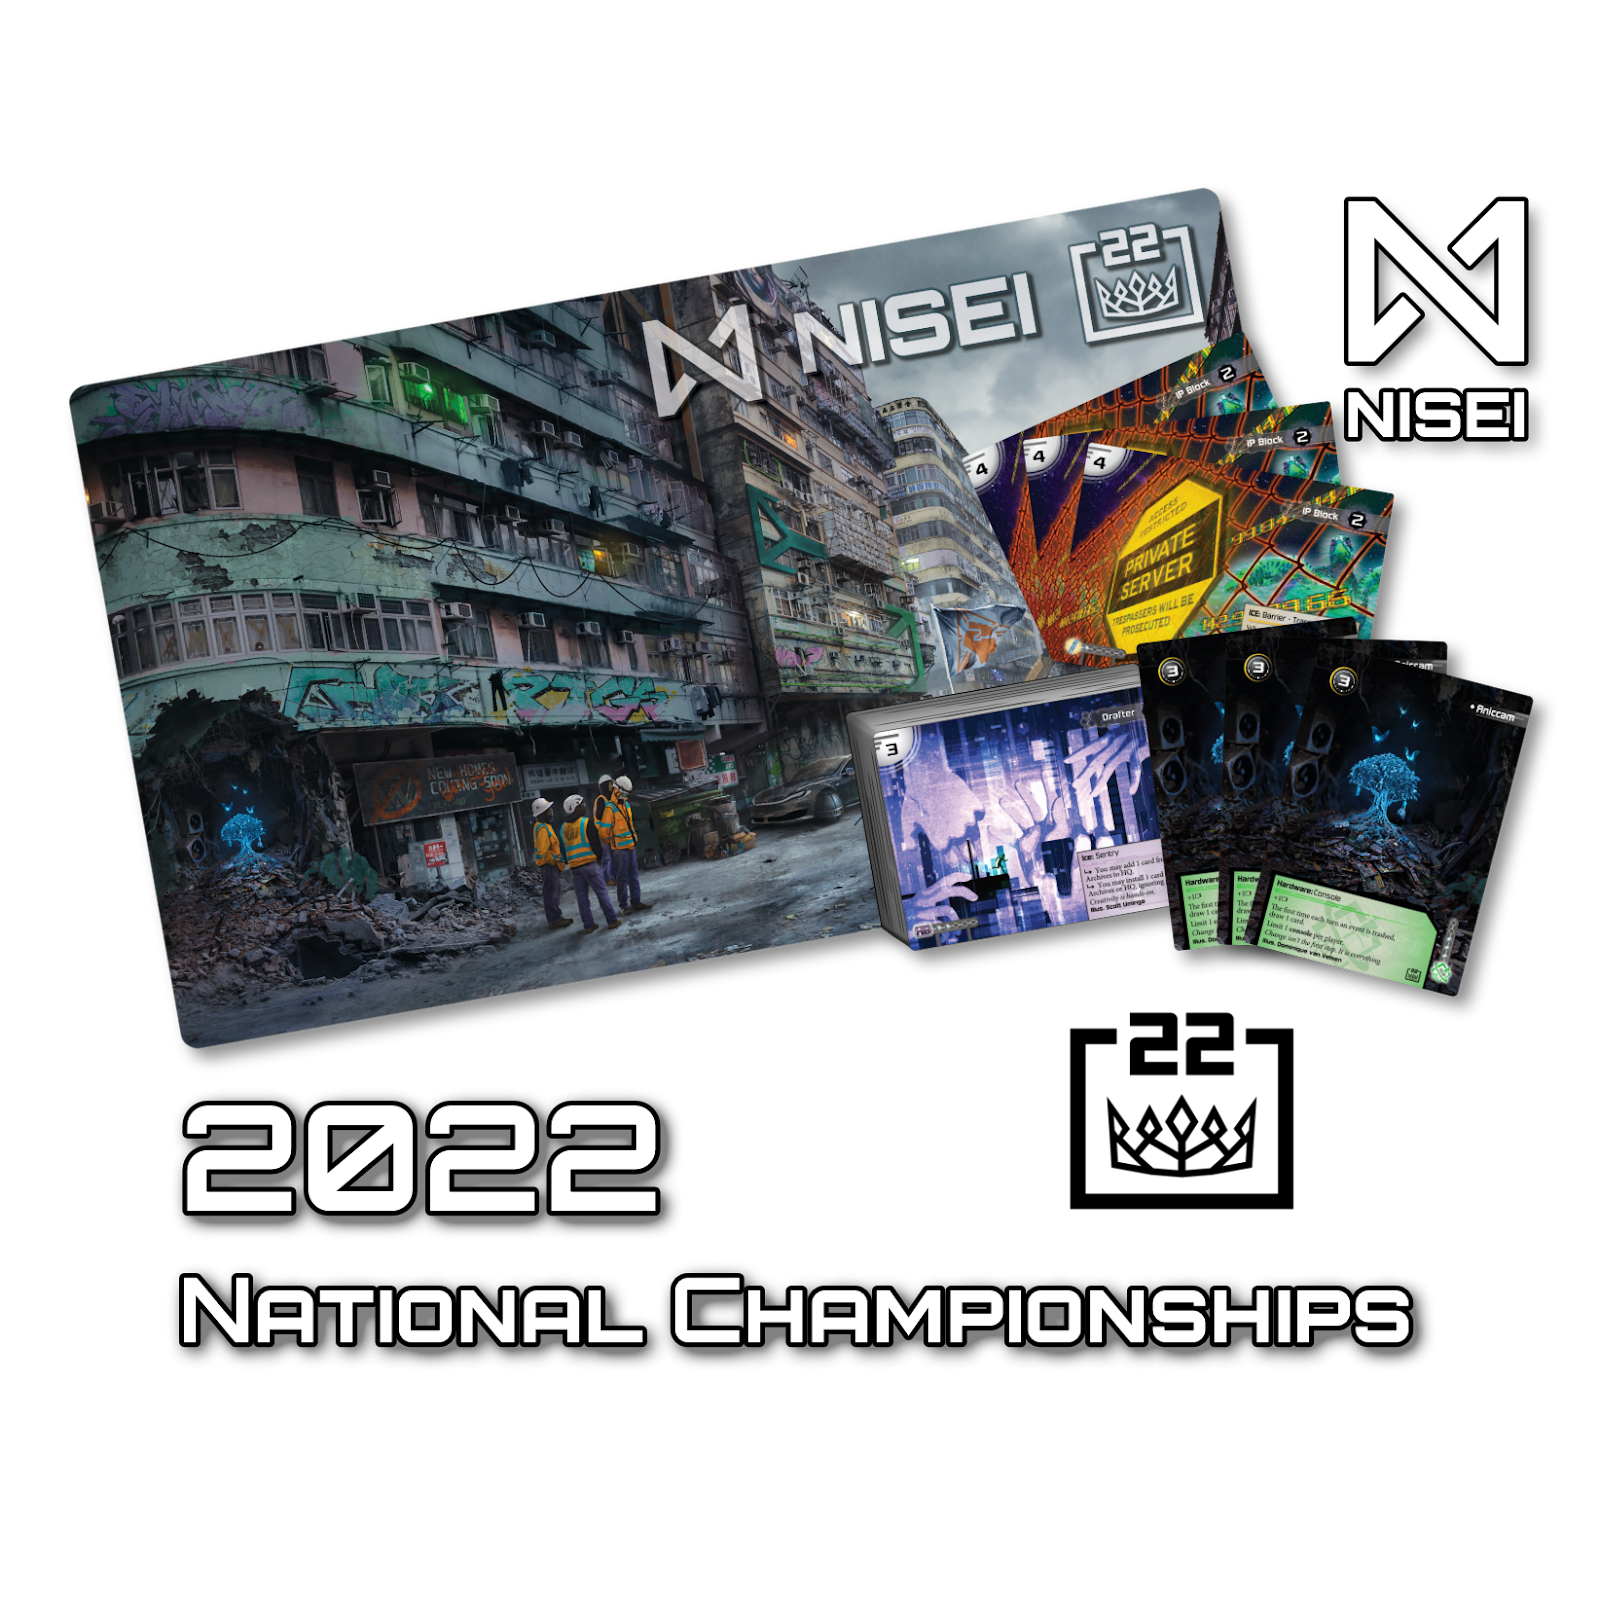 2022 National Championships prize spread, showing a playmat depicting slums and the cards Drafter, IP Block, and Aniccam